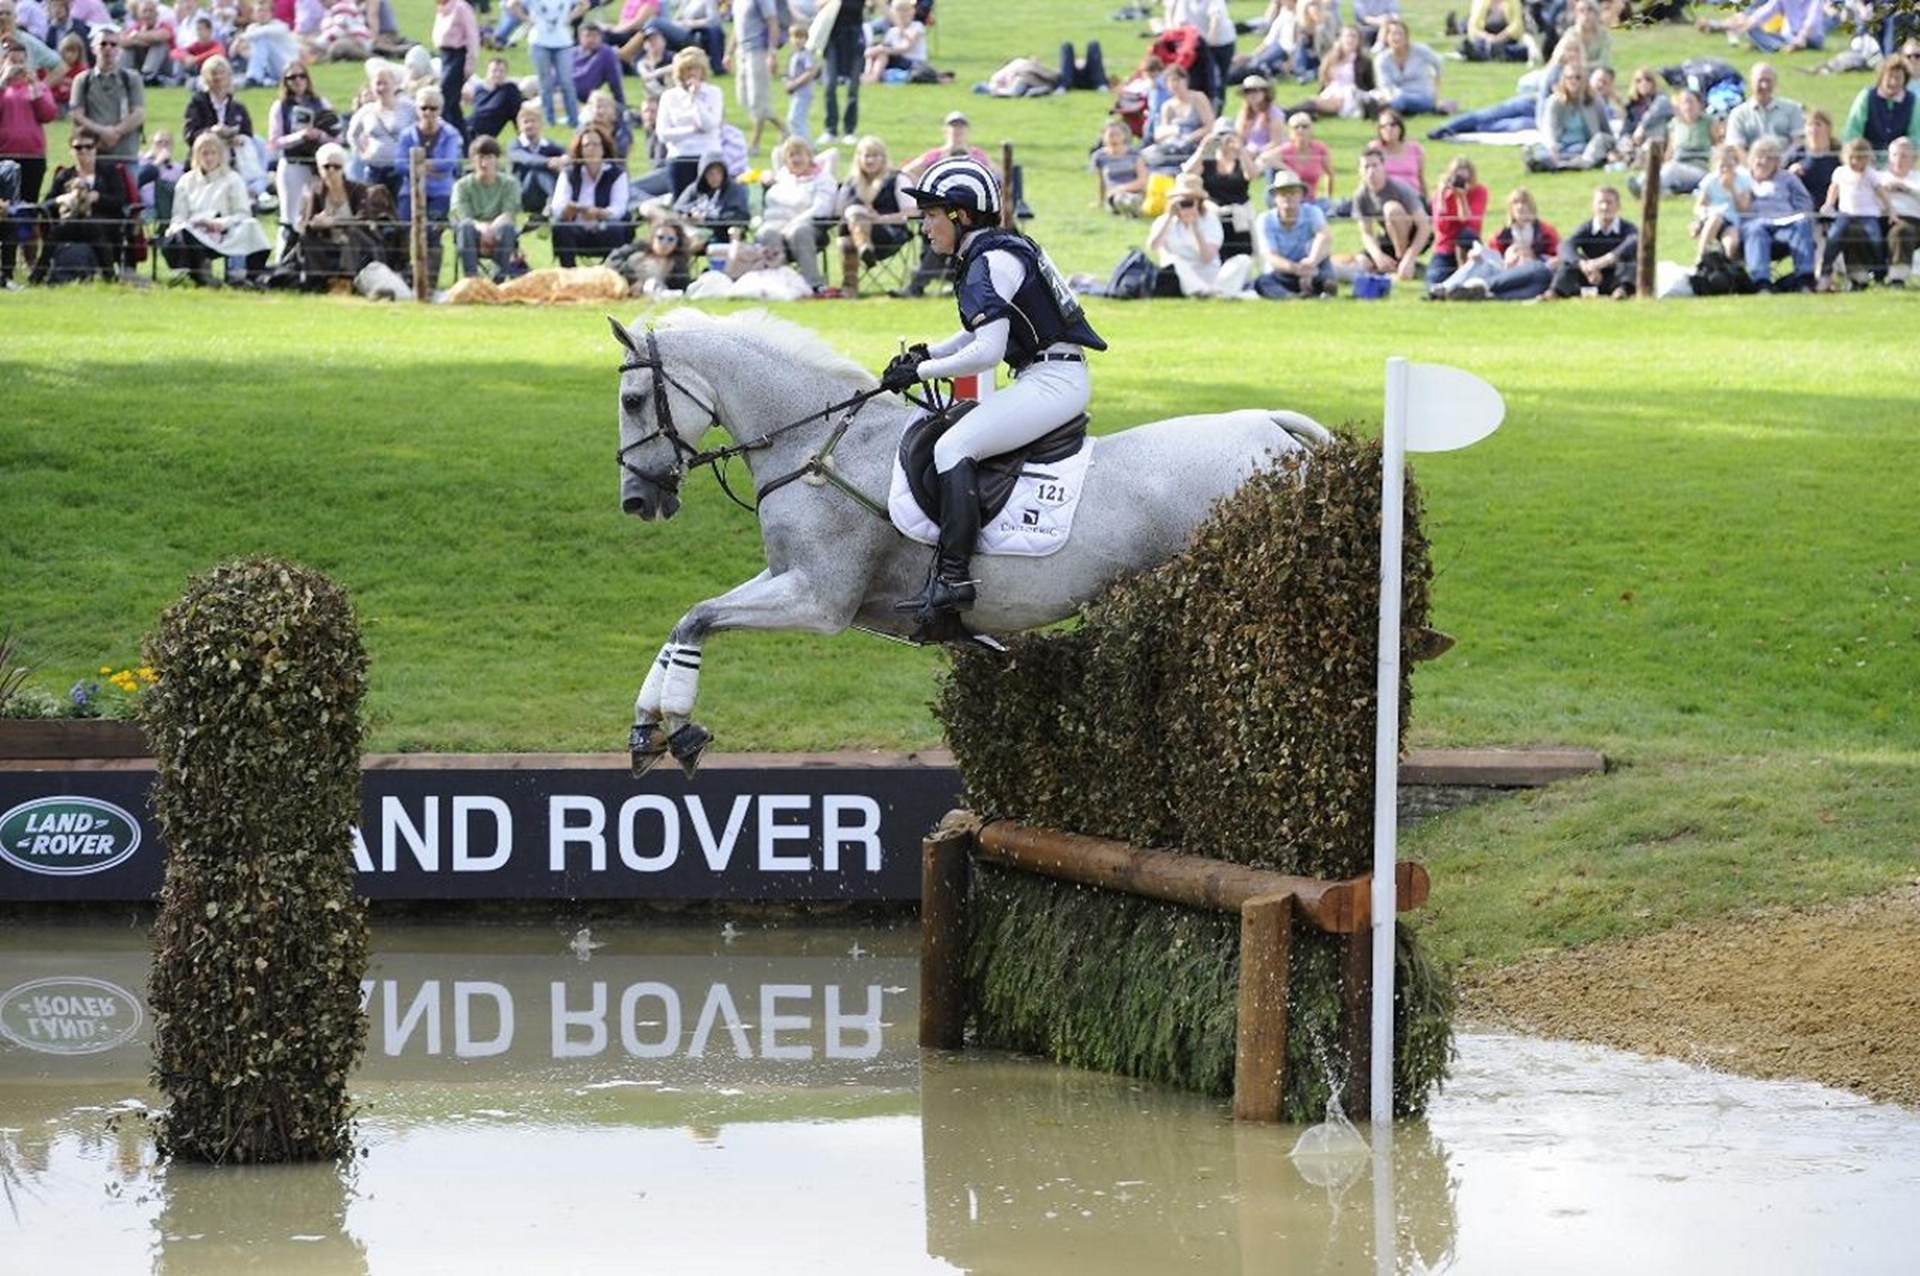 LAND ROVER CELEBRATES EQUESTRIAN TEAM GBR SUCCESS AT THE LAND ROVER BURGHLEY HORSE TRIALS